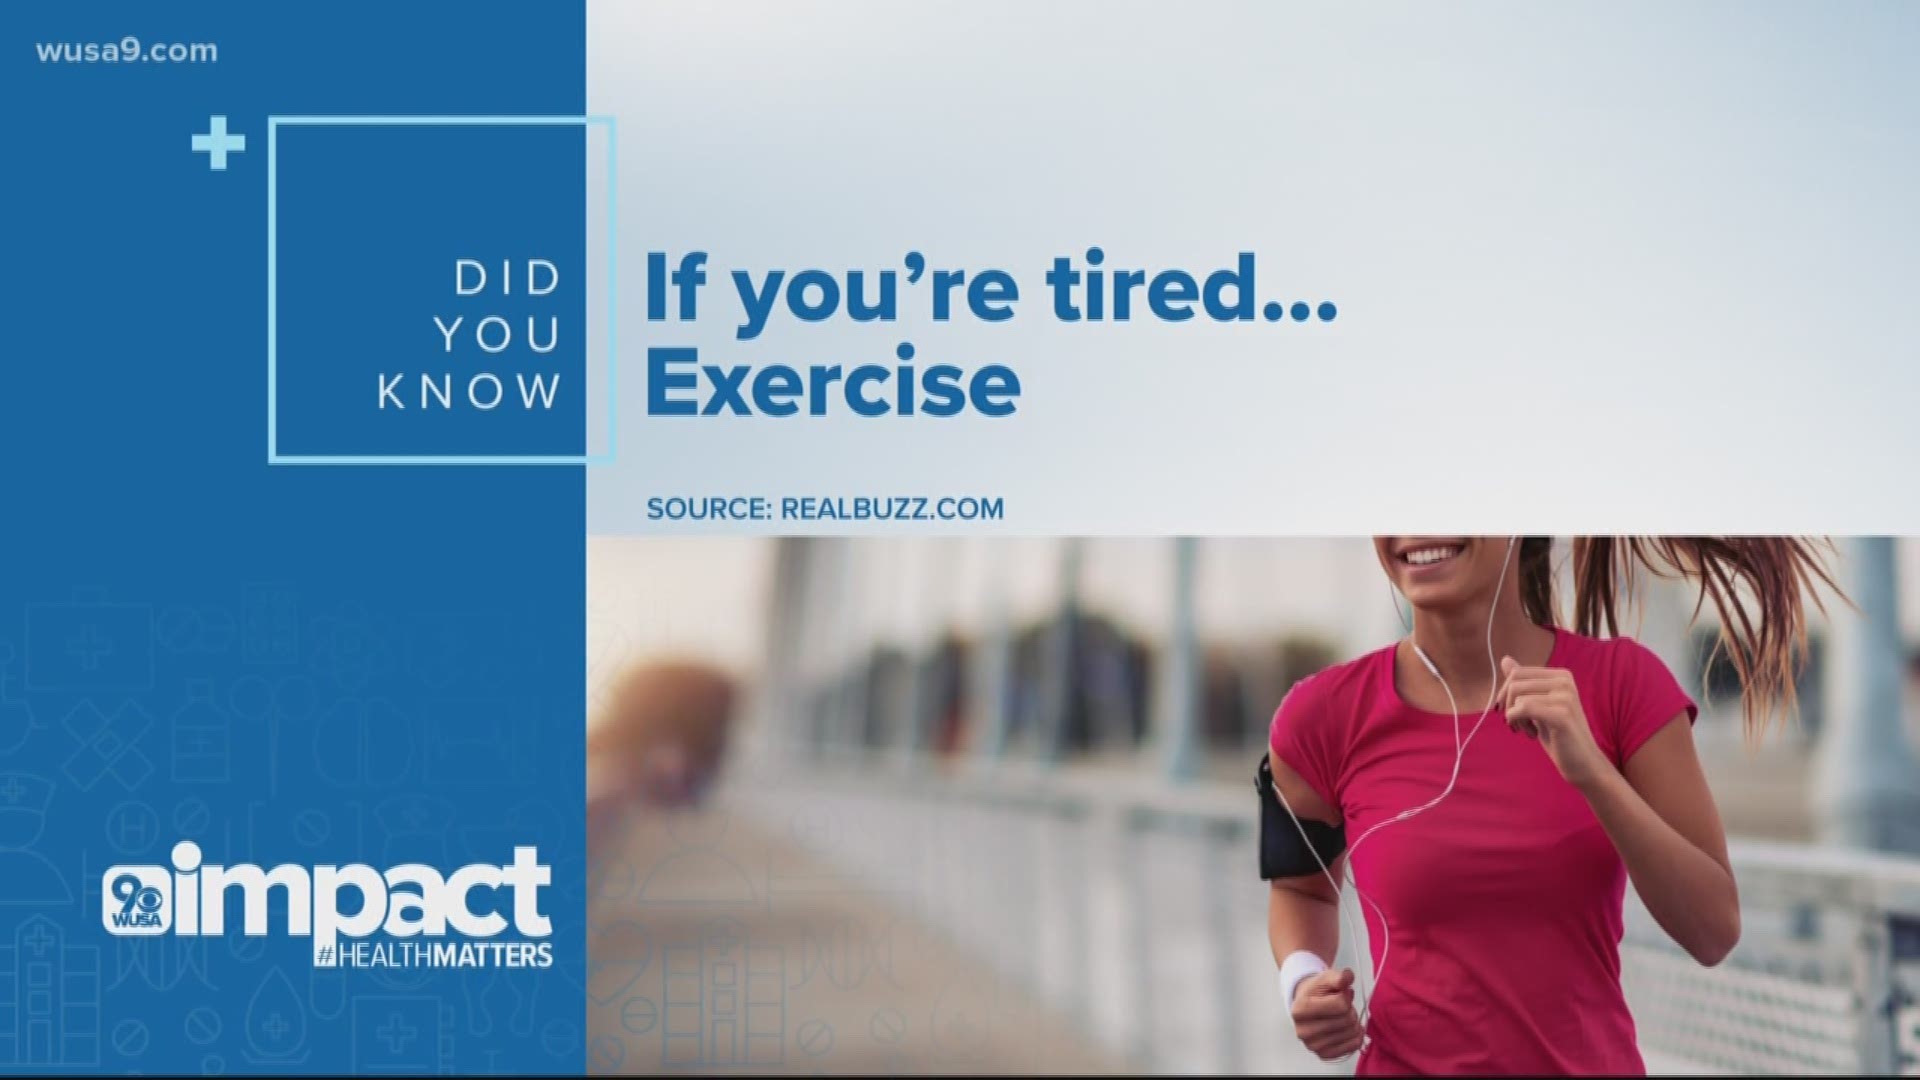 A study published in Medicine and Science in Sports and Exercise found that levels of fatigue and depression improved after a 30-minute session of moderate exercise.